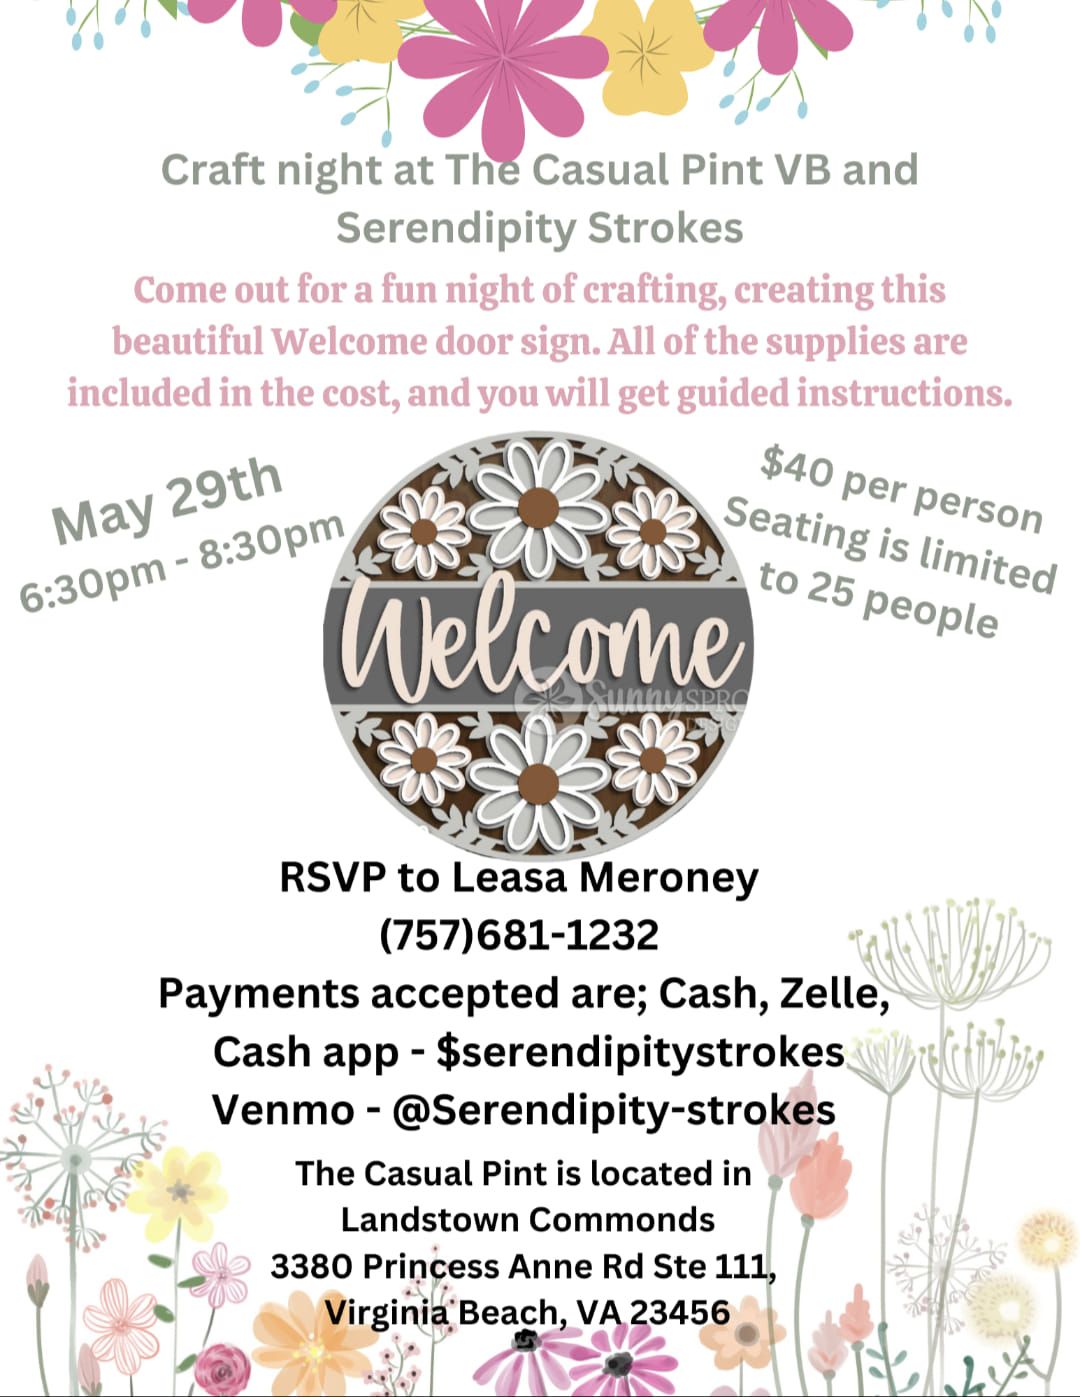 Craft Paint Event at The Casual Pint VB with Serendipity Strokes 